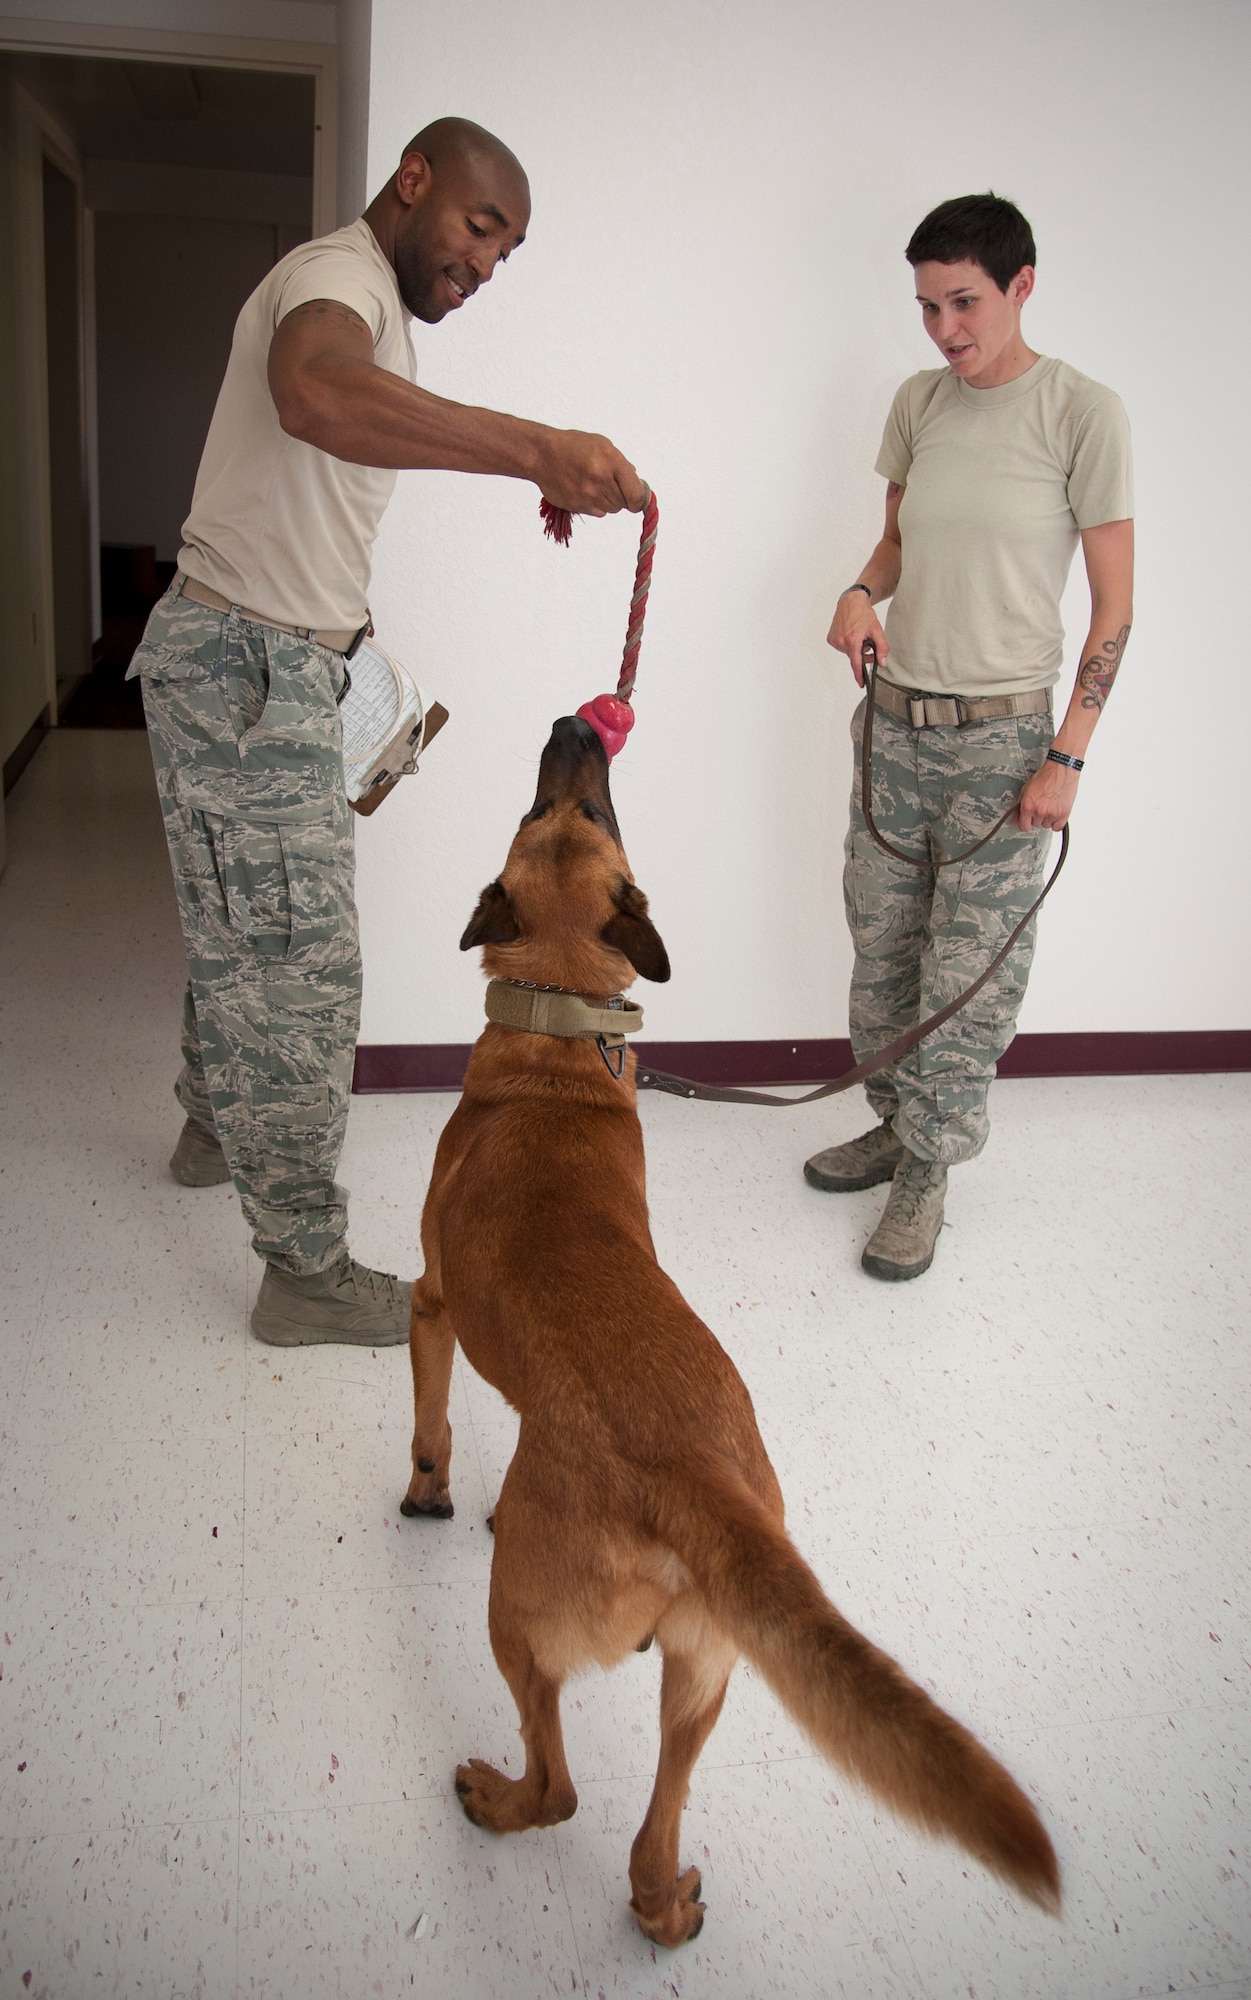 Staff Sgt. Curtis Lewis, left, and Staff Sgt. Britney Simpson, both 47th Security Forces Squadron military working dog handlers, play with Eewok, a MWD, after training at Laughlin Air Force Base, Texas, May 22, 2013. “Every dog has their very own personality,” said Simpson. “My dog, Eewok, is zany and spastic and that’s something I’ve never worked with before.” (U.S. Air Force photo/Airman 1st Class John D. Partlow)